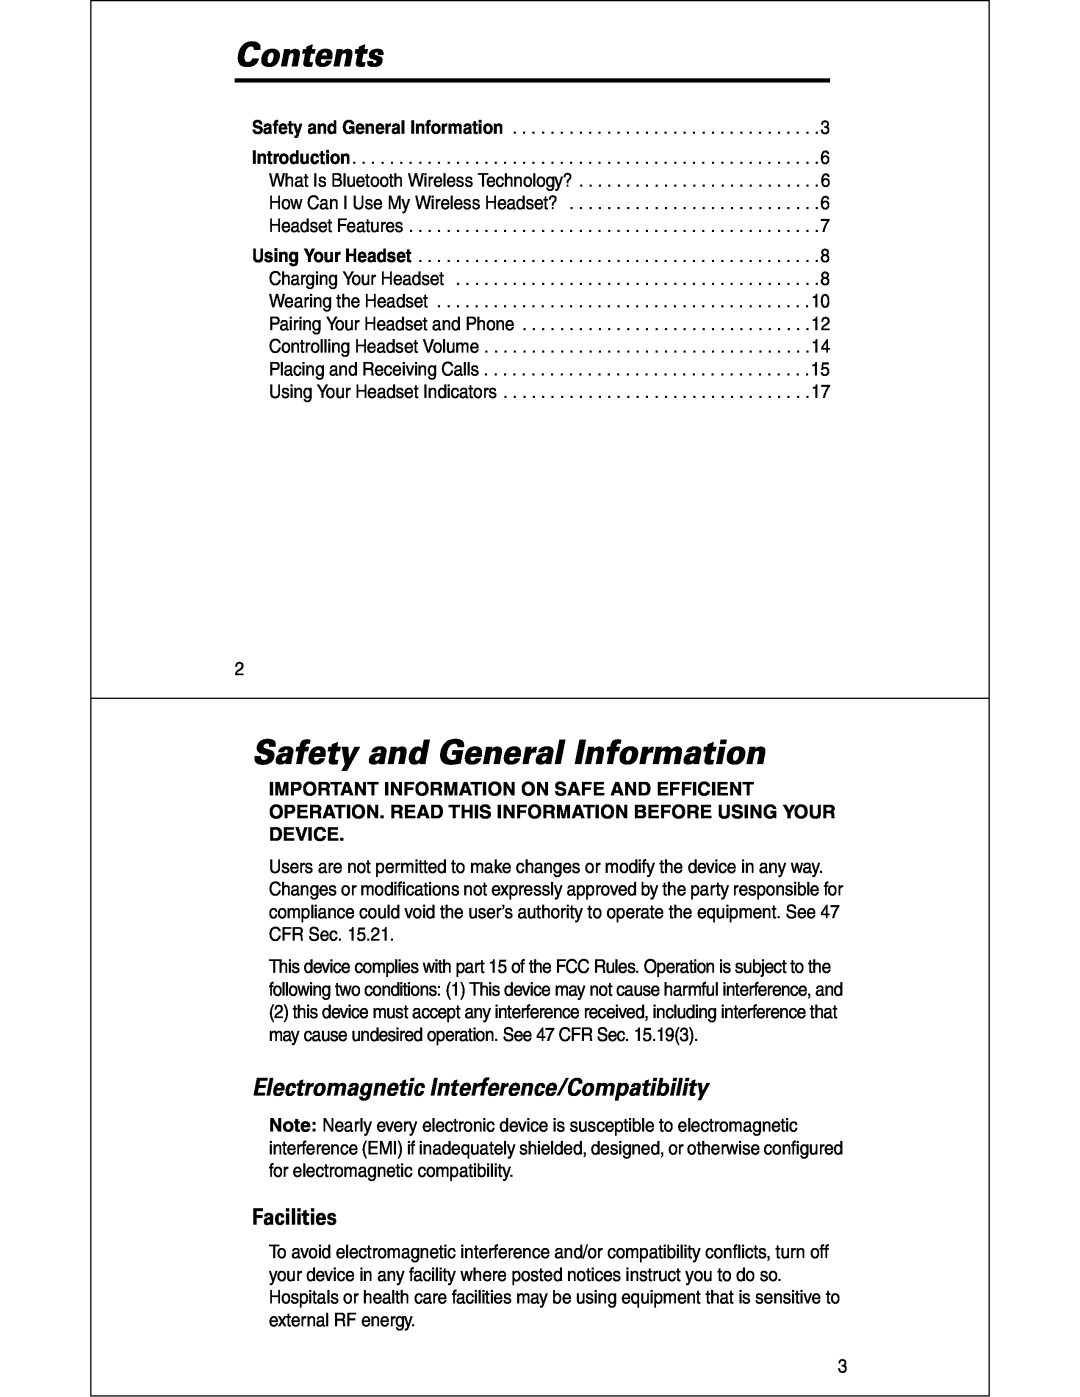 Motorola HS810 manual Contents, Safety and General Information, Electromagnetic Interference/Compatibility, Facilities 